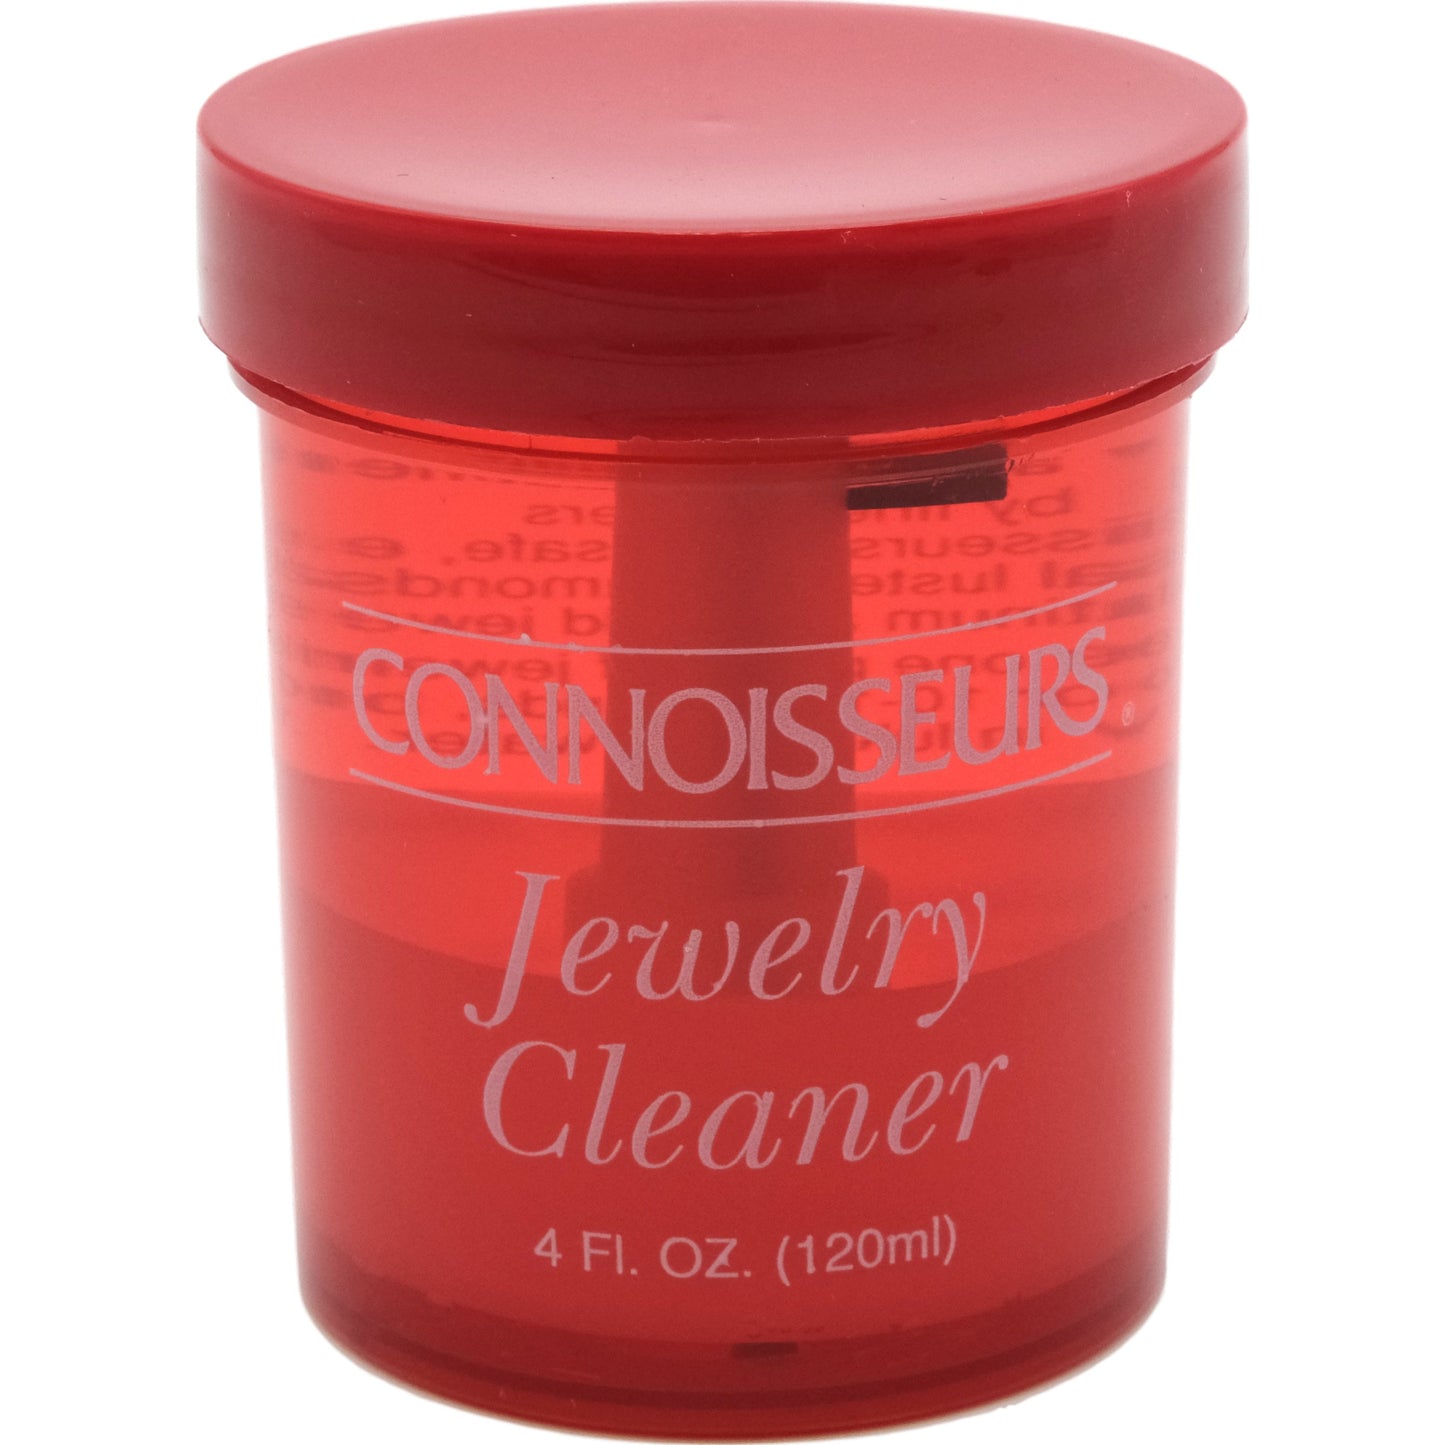 Connoisseurs 1045 Precious Jewelry Cleaner 8 FL Oz for sale online